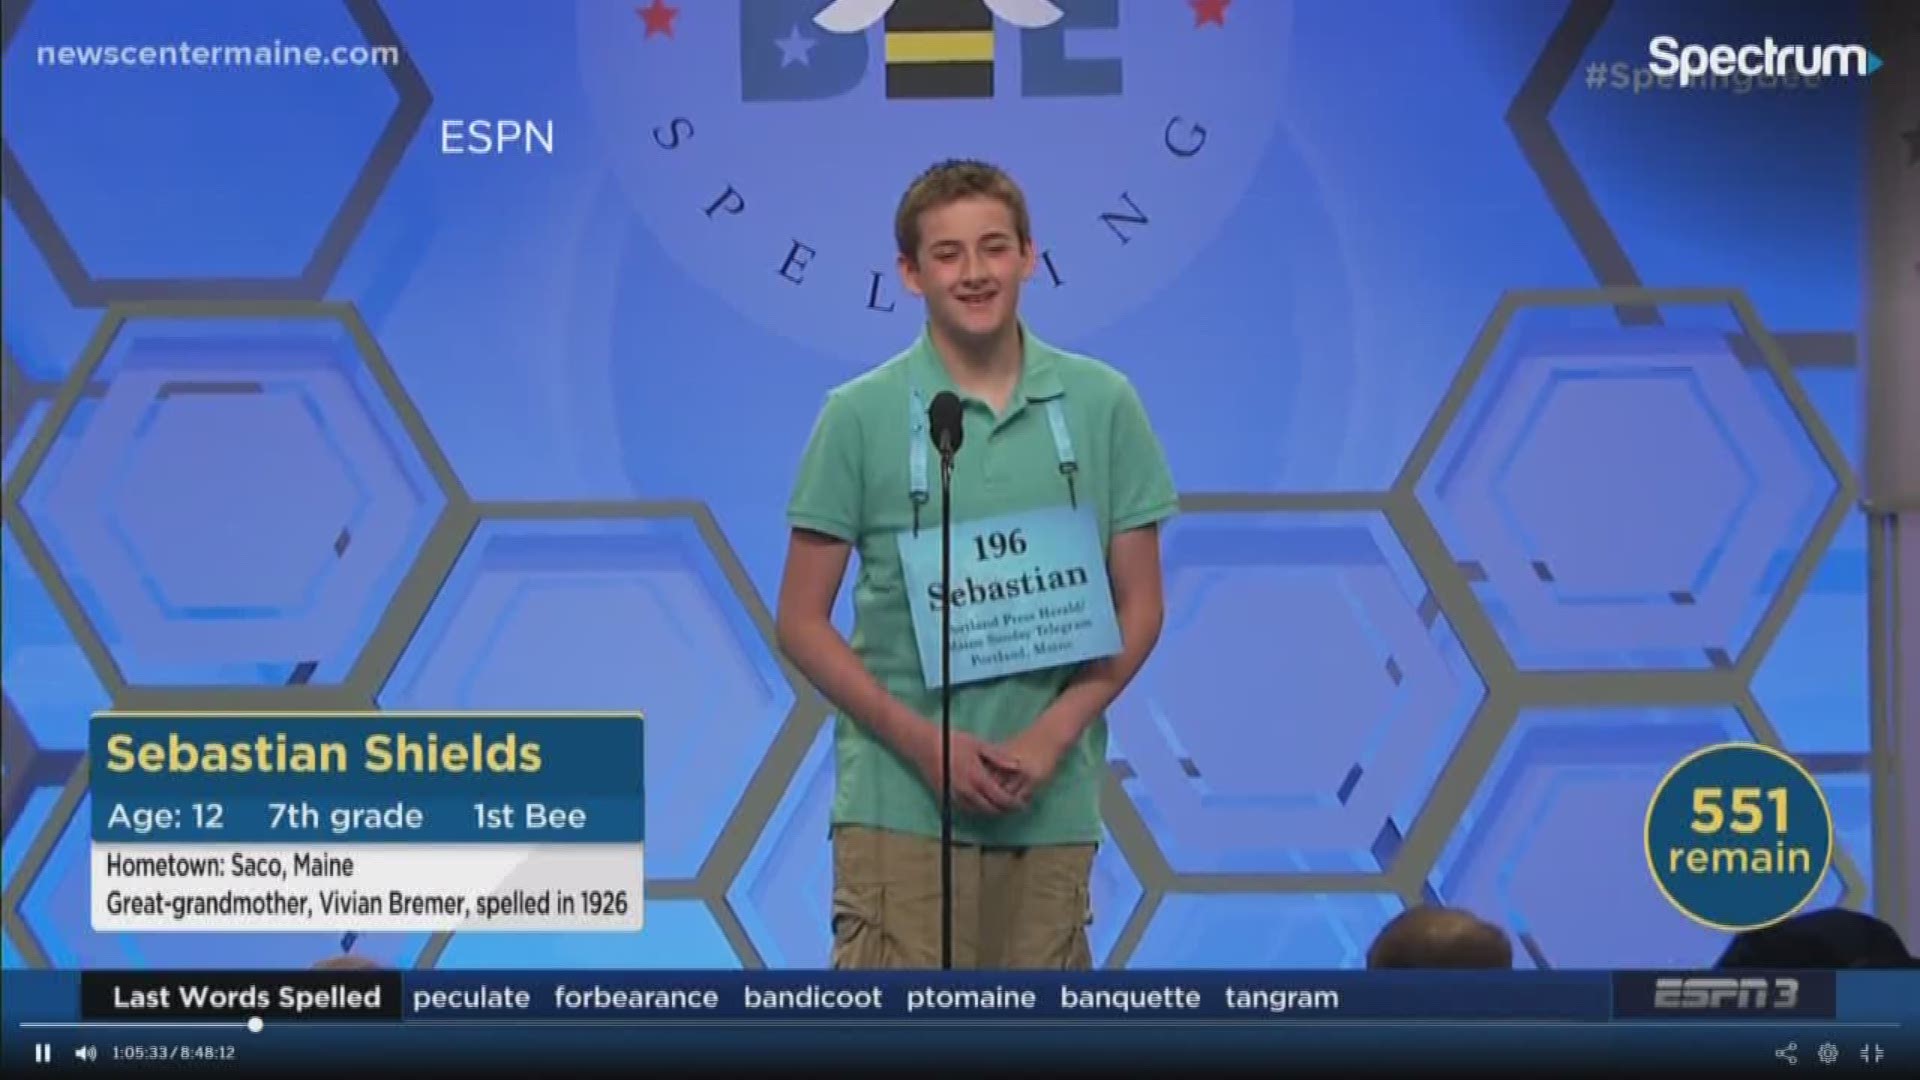 Sebastian Shields from Saco Middle School advanced twice in the Scripps National Spelling Bee in Washington, D.C. before he was eliminated.